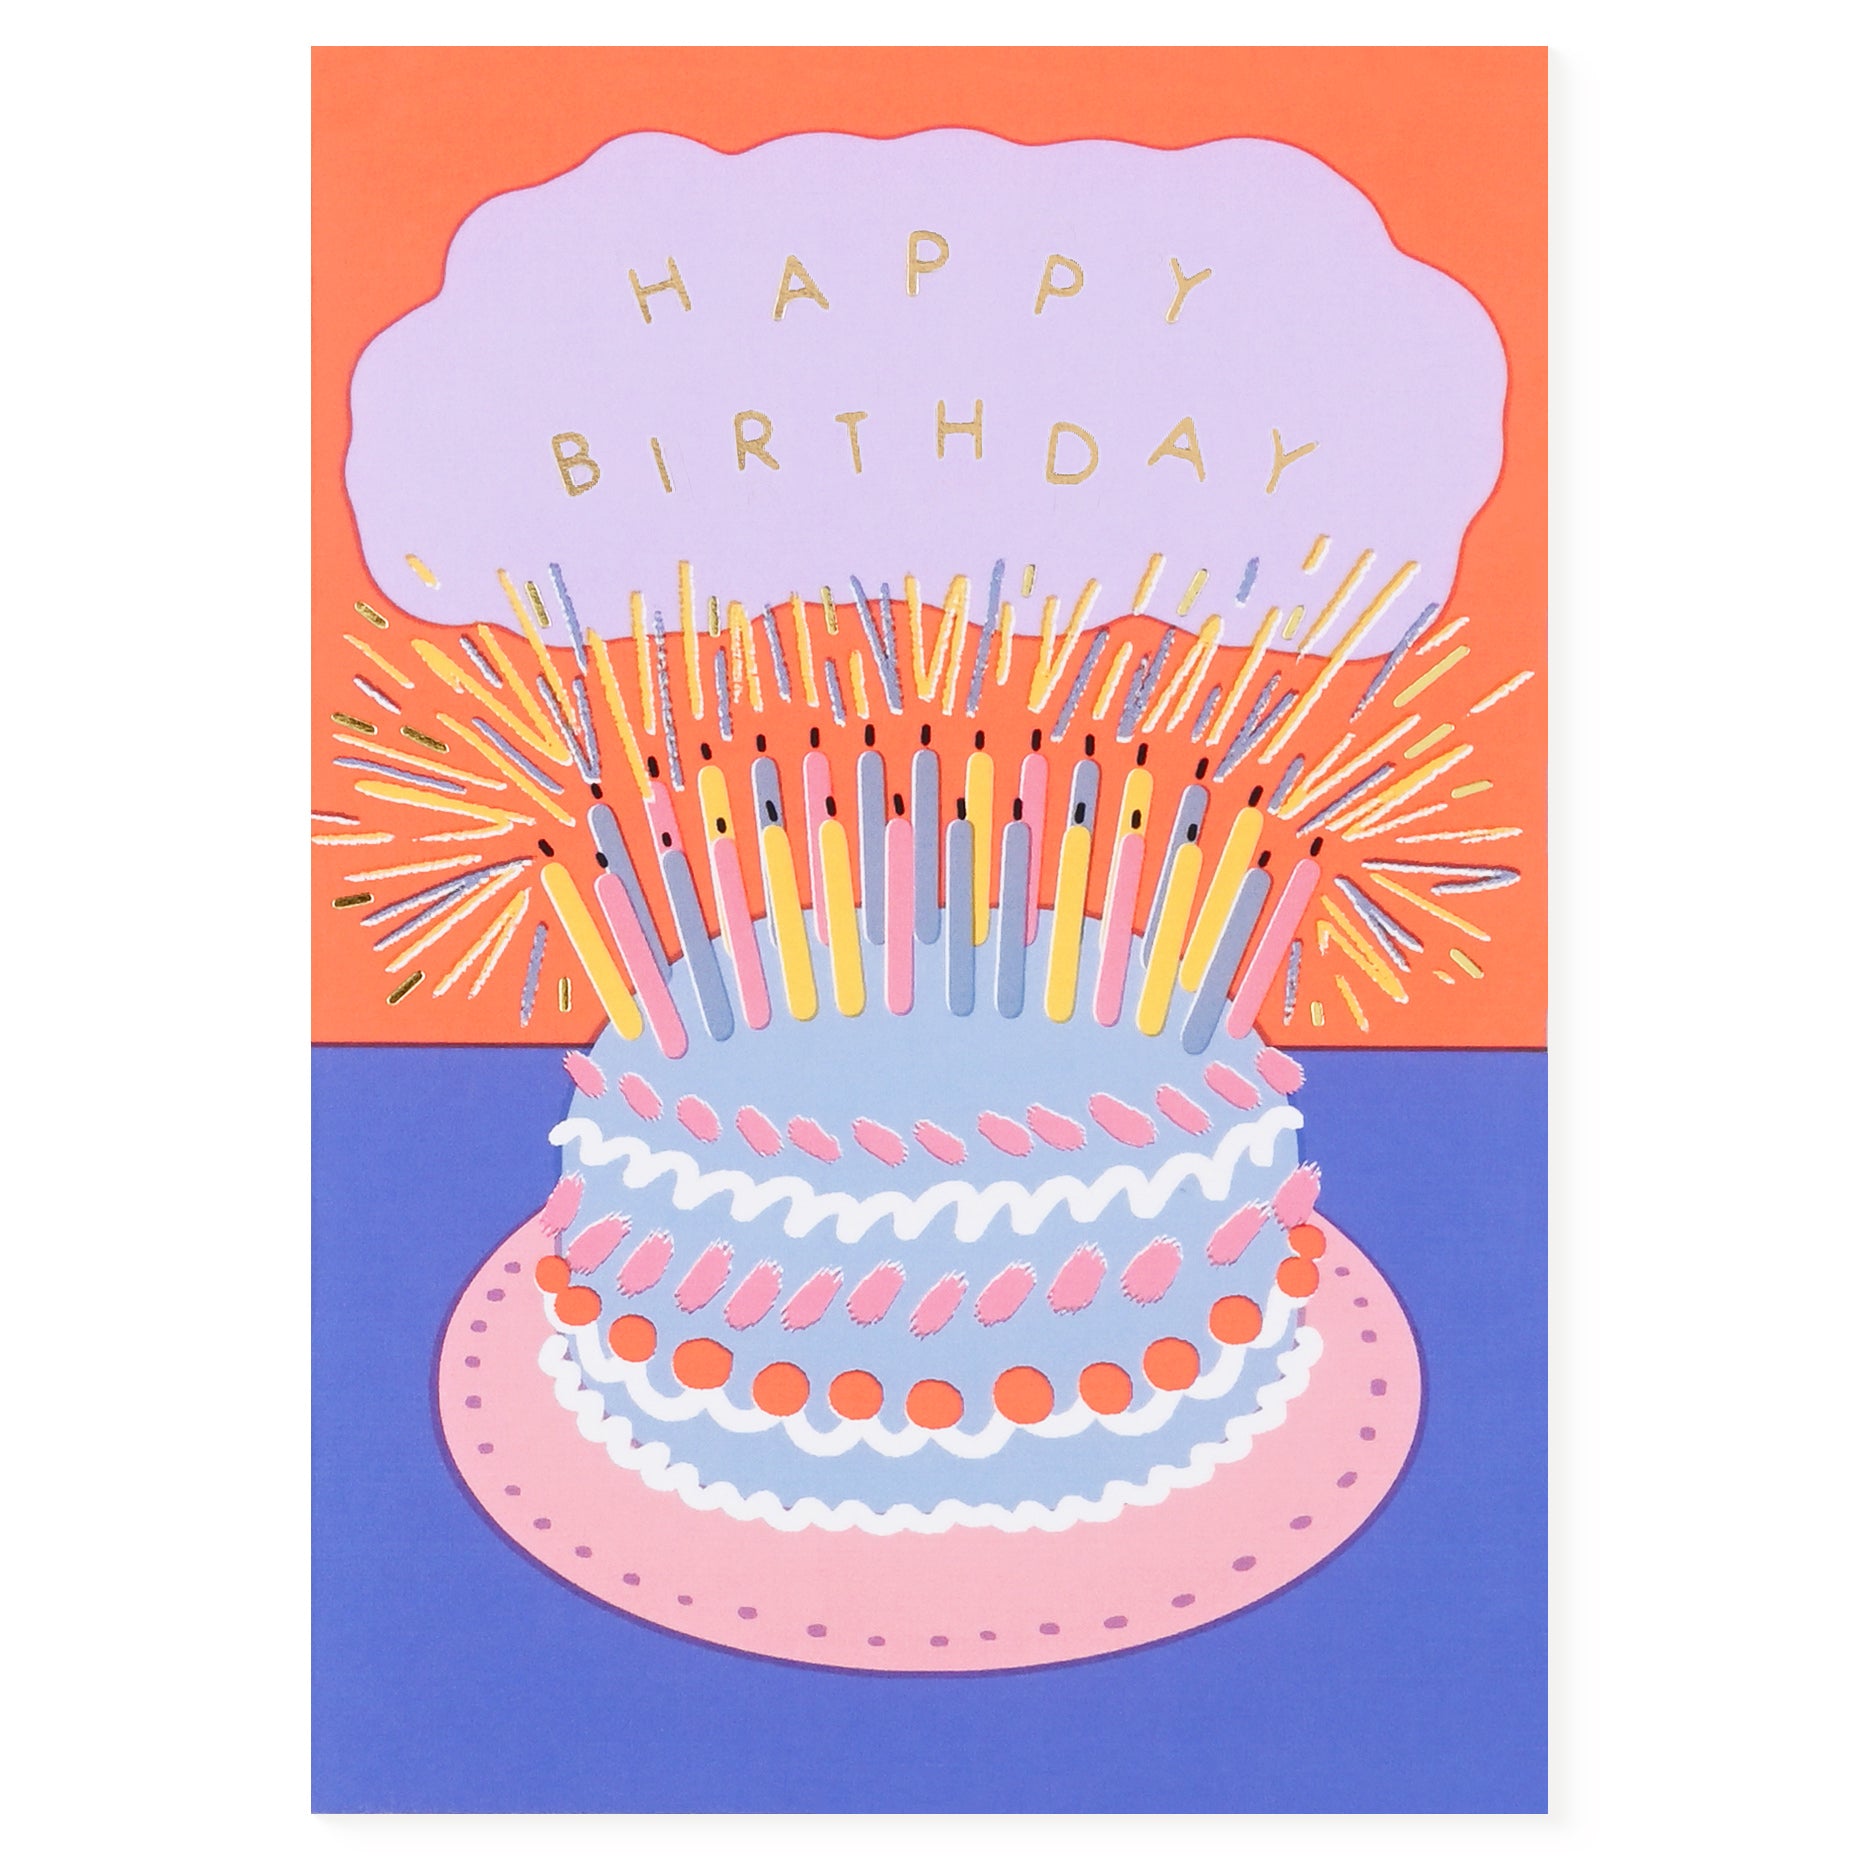 Wrap Cake And Candles Birthday Card 